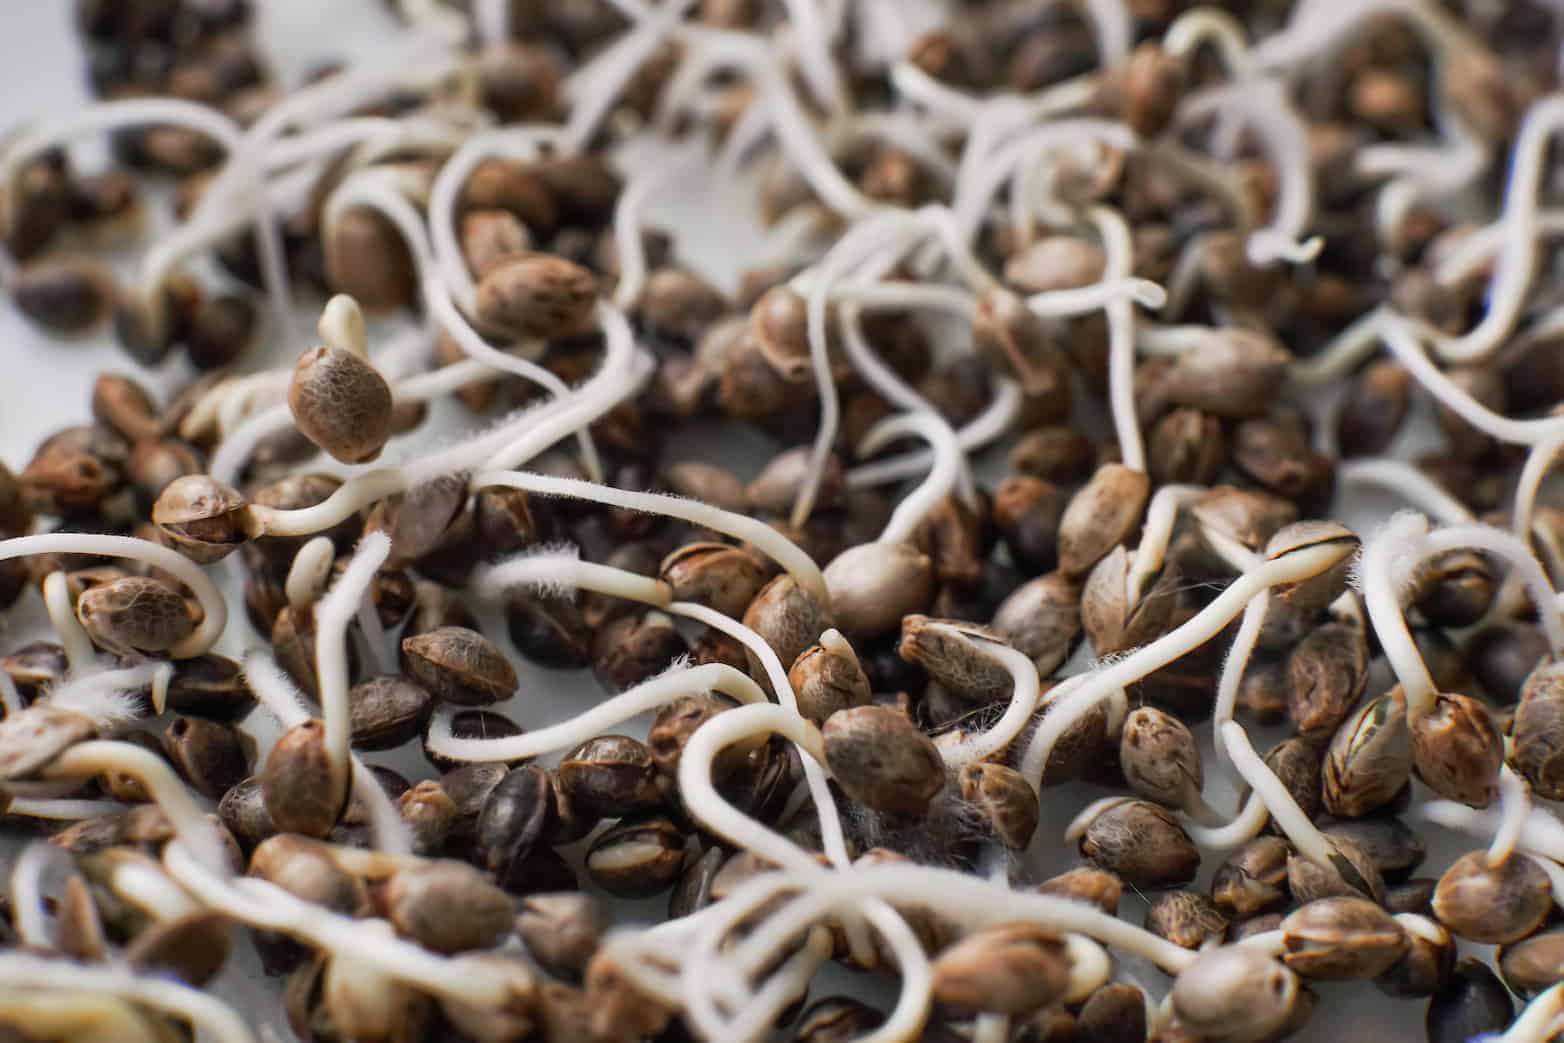 cannabis seeds germinating, what you need to germinate cannabis seeds